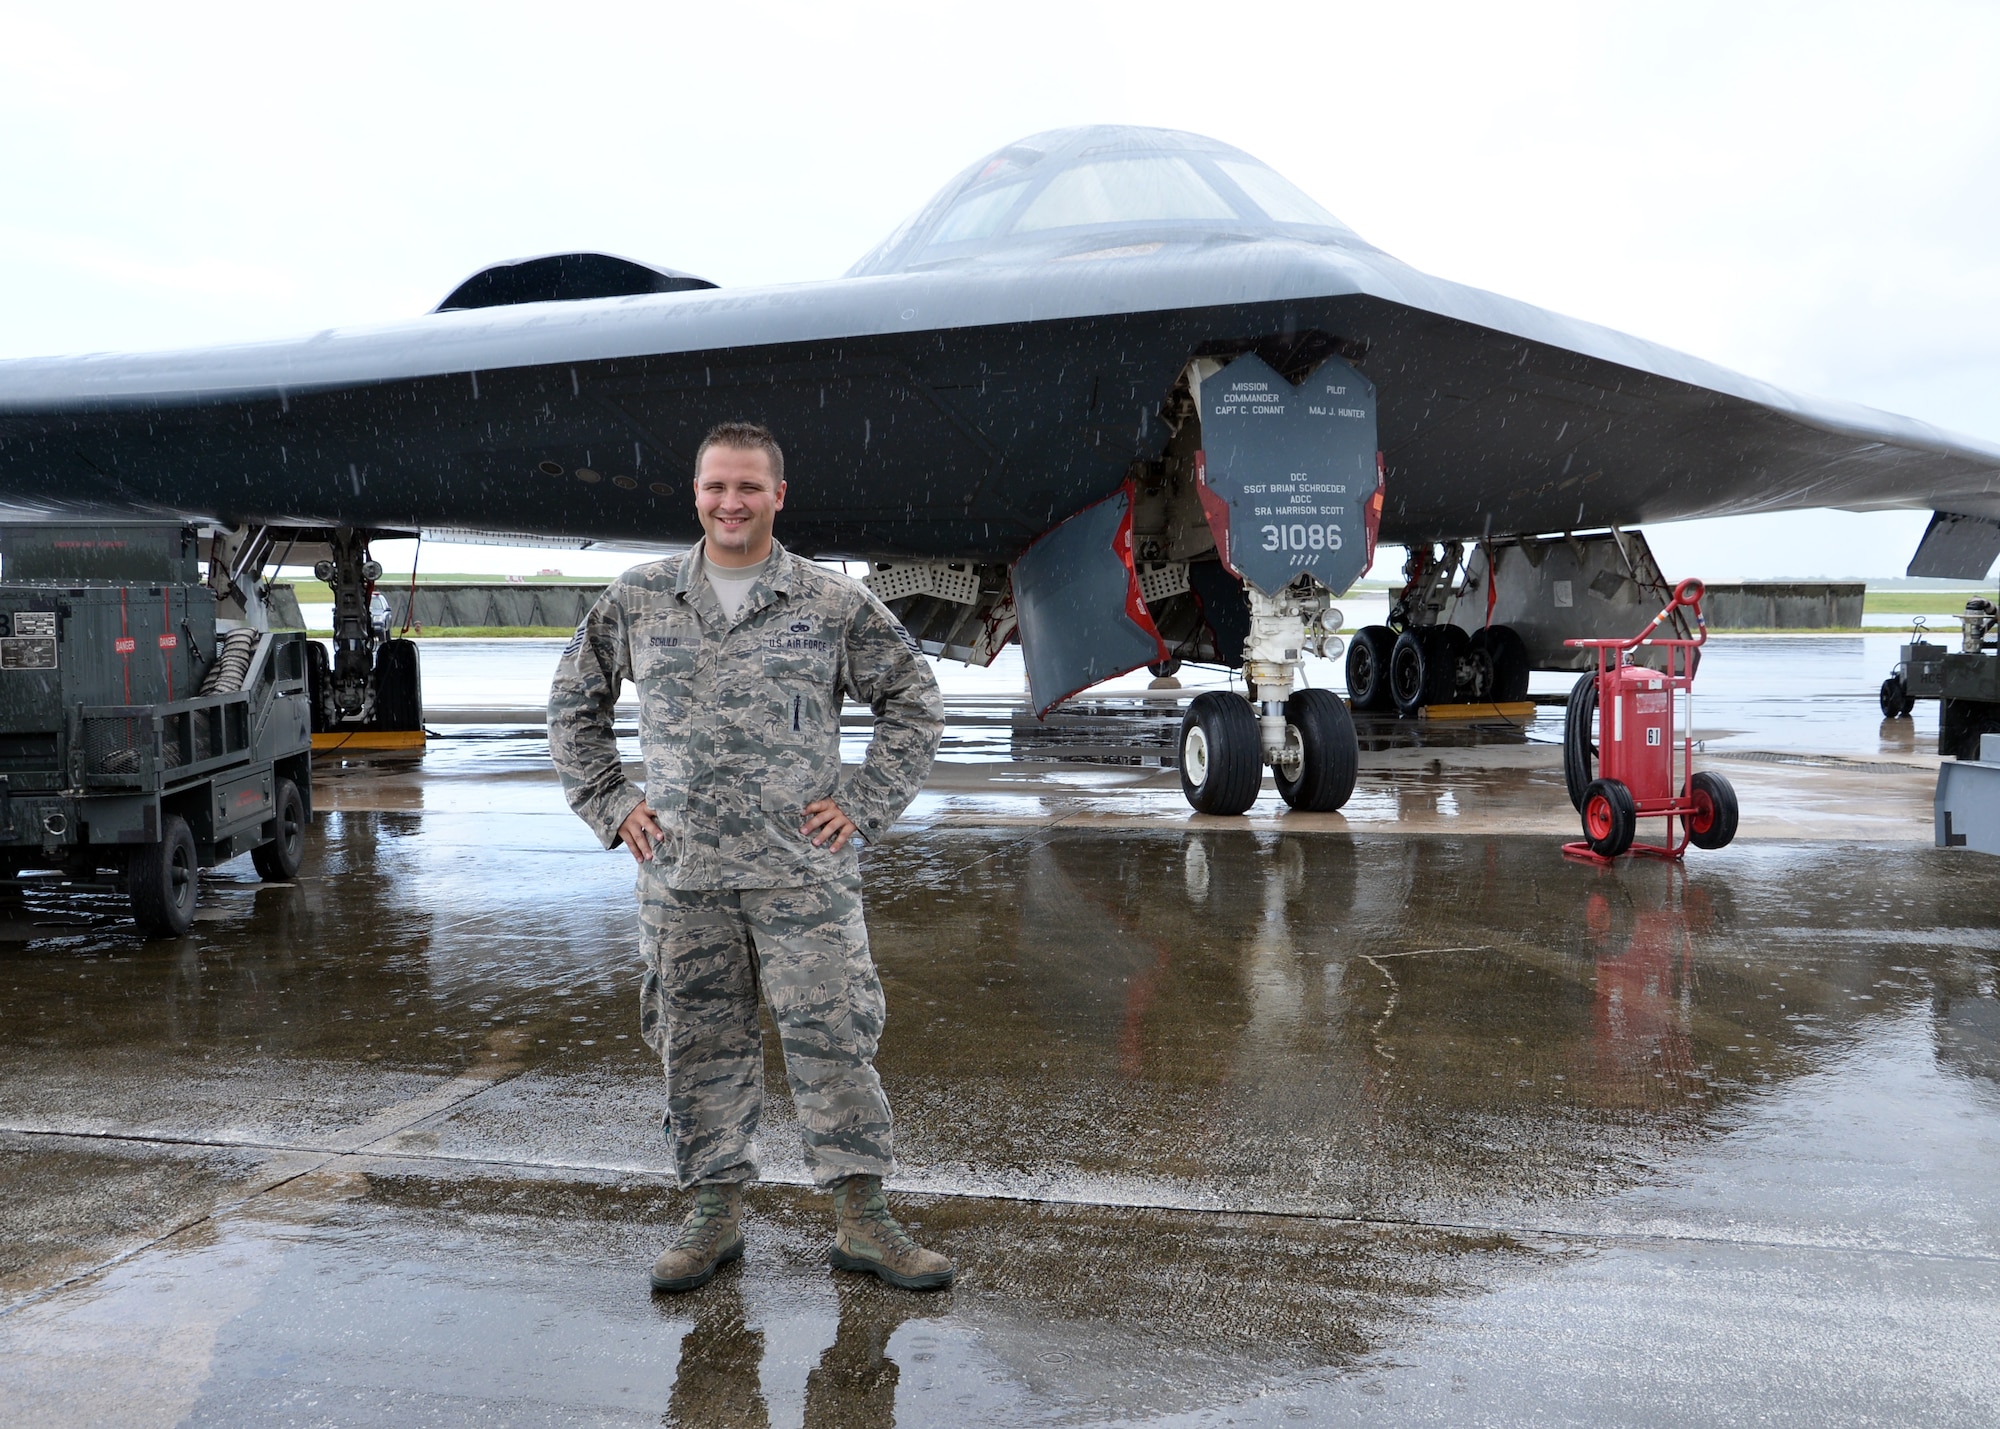 U.S. Air Force Tech Sgt. Brock Schuld, 131st Aircraft Maintenance Squadron maintainer, poses in front of a B-2 Spirit bomber during a deployment, Andersen Air Force Base, Guam, Aug. 22, 2014.  The bombers and approximately 200 support Airmen, assigned to the 509th Bomb Wing at Whiteman Air Force Base, Mo., deployed to Guam Aug. 6, 2014 to improve combat readiness and ensure regional stability.  Bomber deployments help maintain stability in the region while allowing units to become familiar with operating in the theater according to USPACOM.  (U.S. Air Force photo by Senior Airman Cierra Presentado/Released)